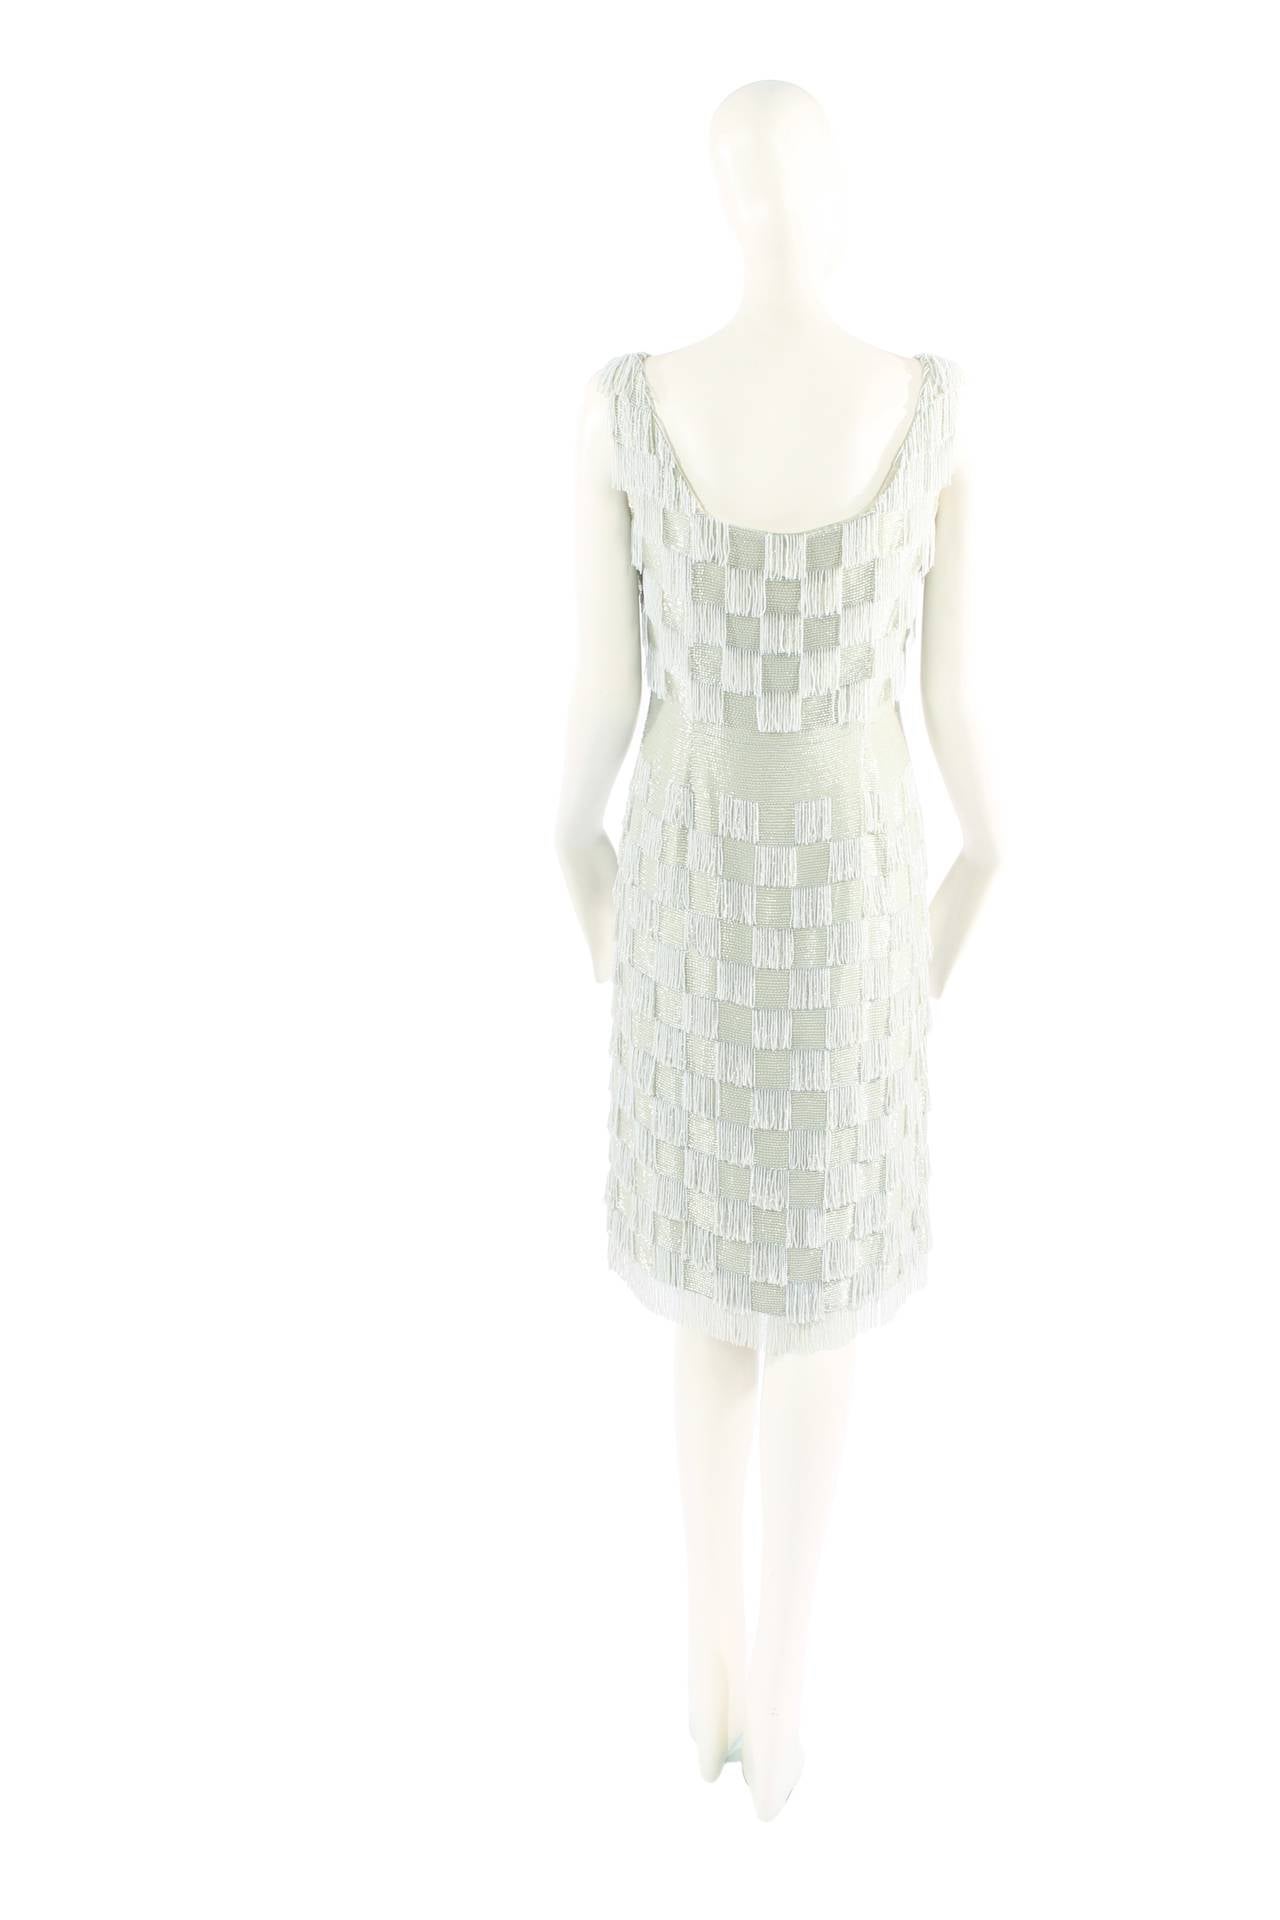 A wonderful haute couture example by one of the greatest couturiers of the 20th century. Crafted in fine celadon silk, the dress is entirely hand-beaded in squares of bugle beads and strung round beads in the same celadon shade, creating a